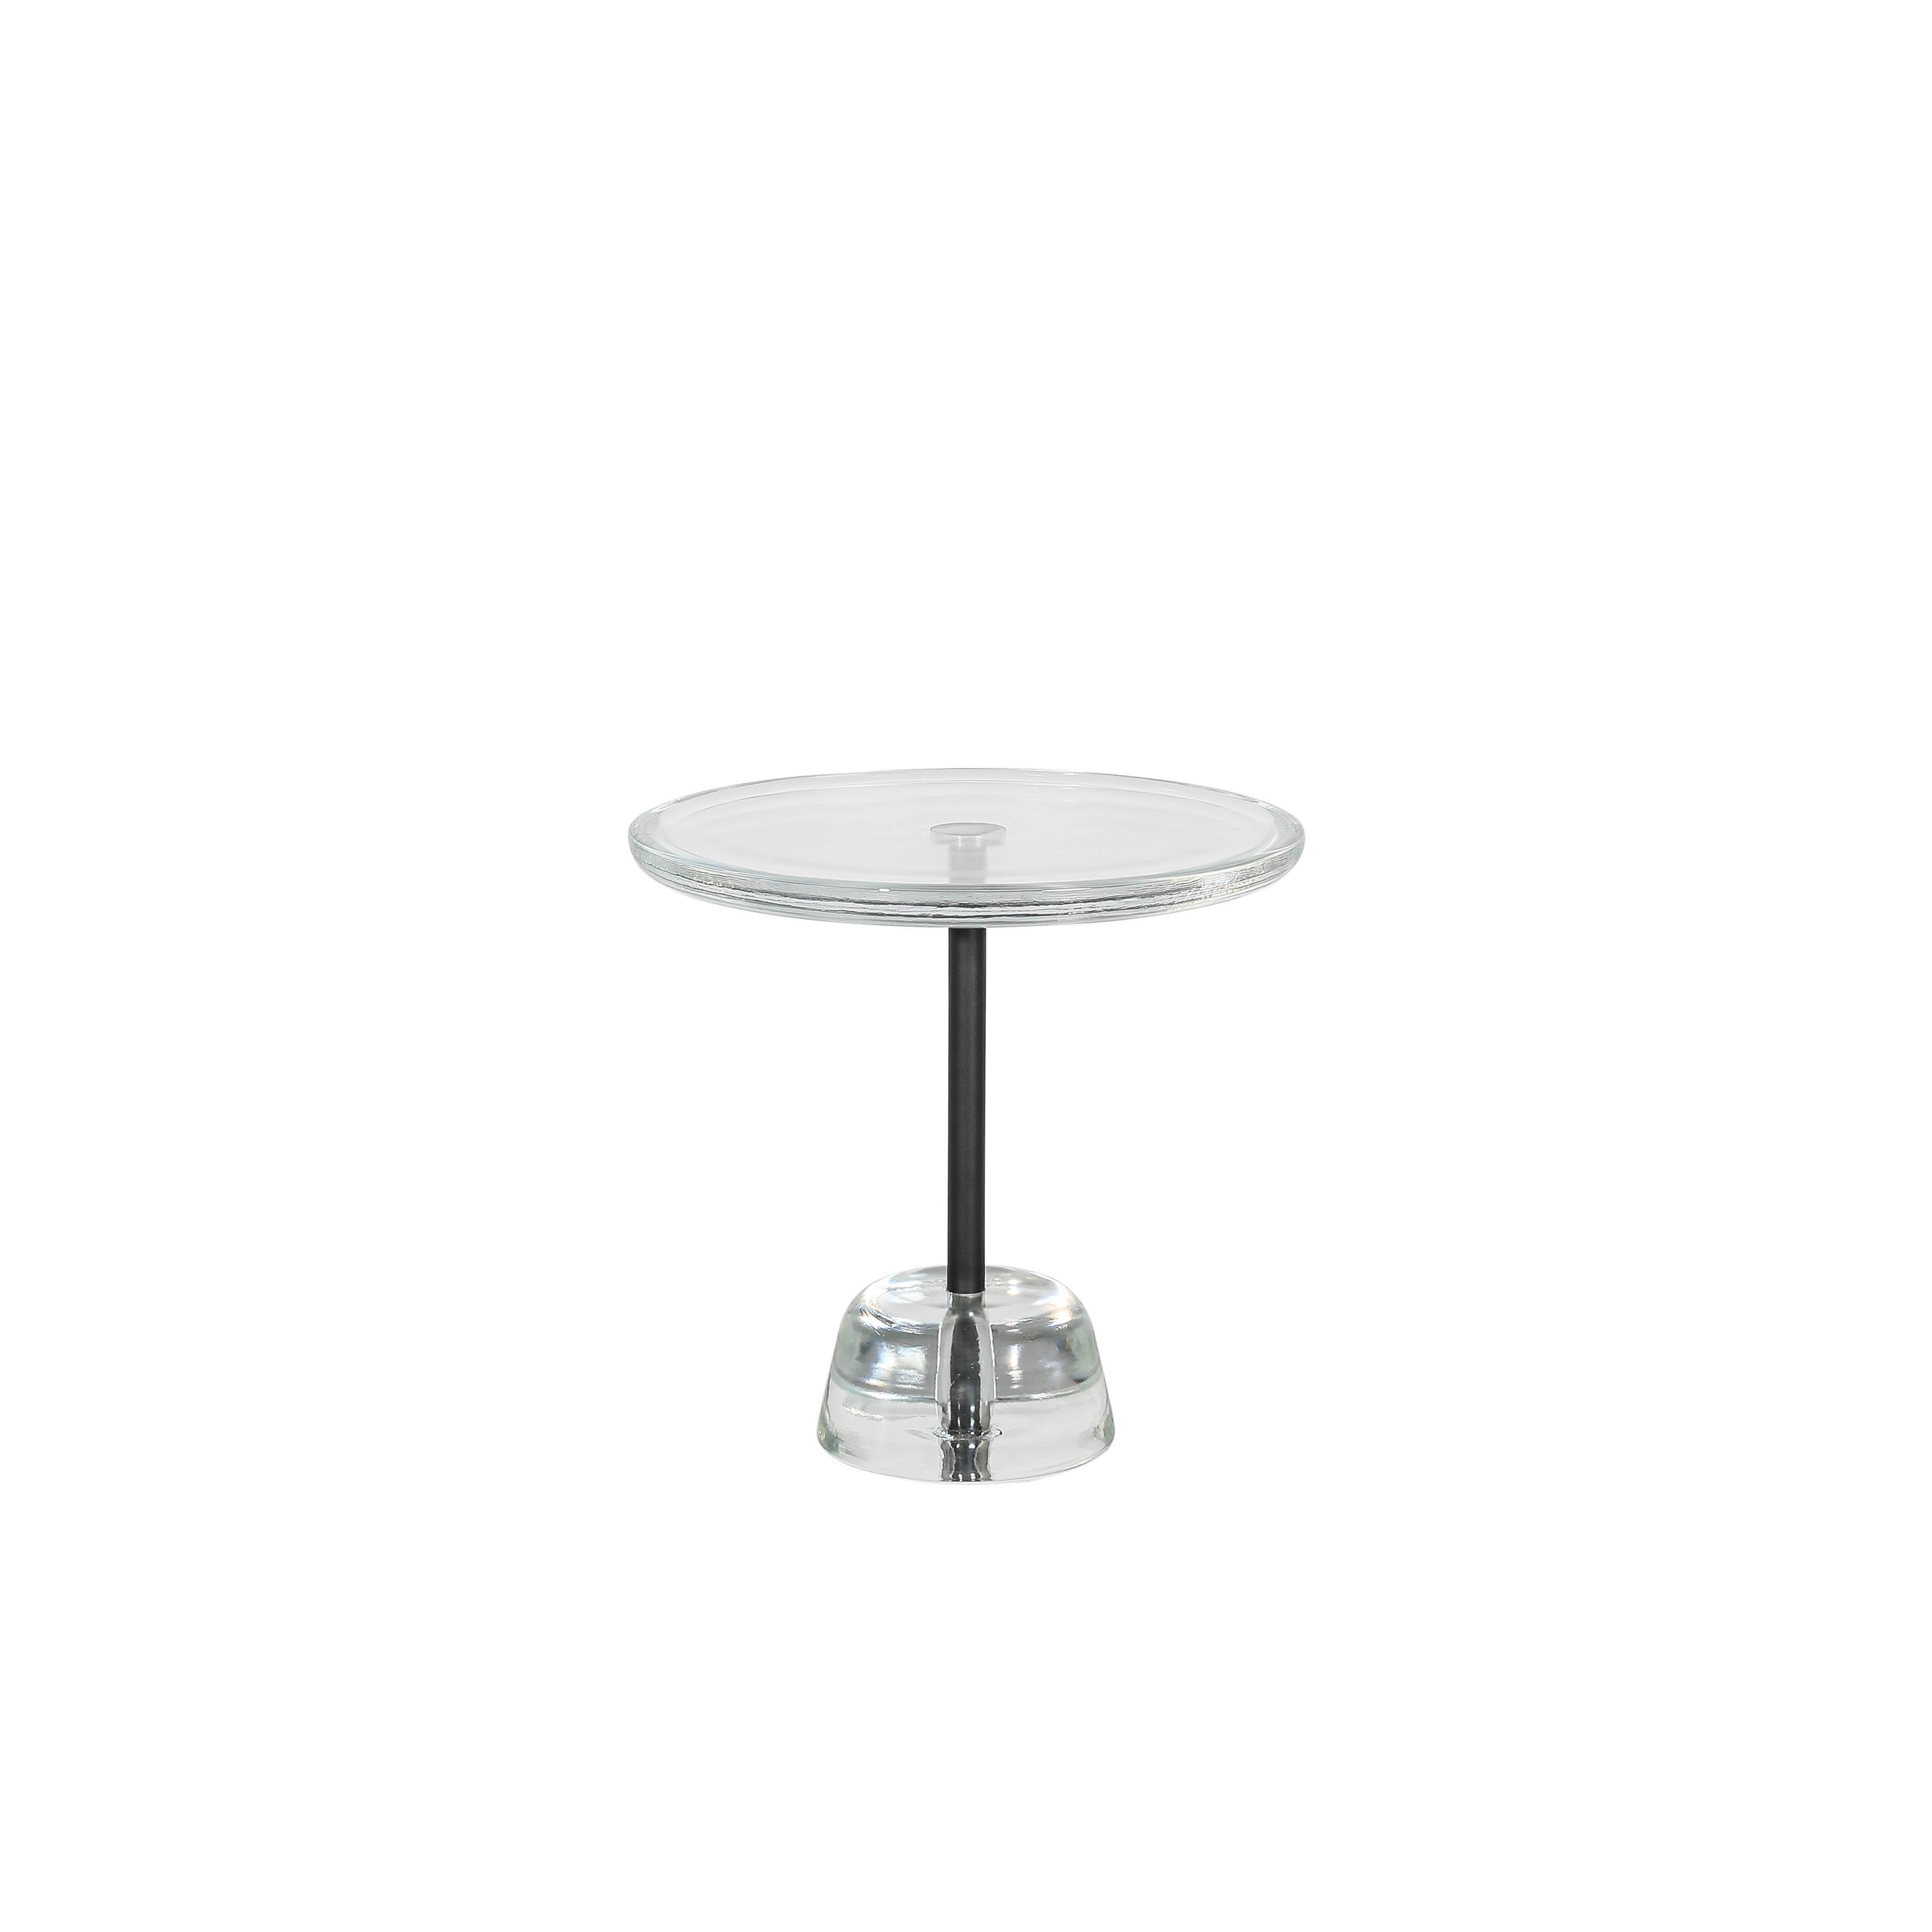 Pina low transparent black side table by Pulpo
Dimensions: D44 x H42 cm
Materials: glass; brass and steel

Also available in different colours. 

Sebastian Herkner’s distinctively tall, skinny side table series pina is inspired by the abstract